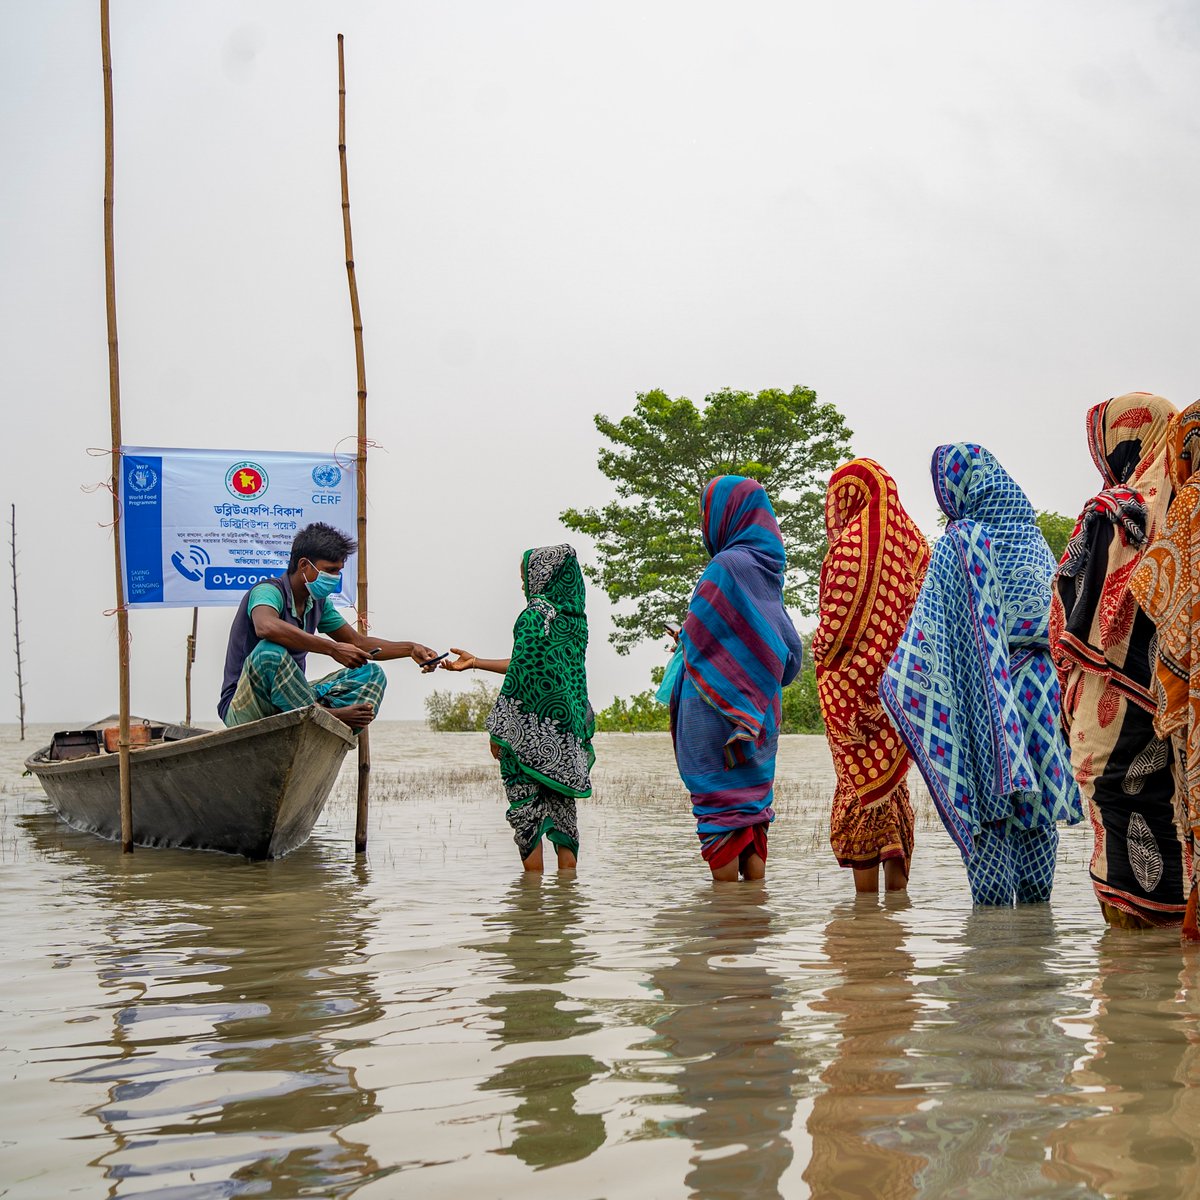 Water levels in #Bangladesh are finally receding for the first time in over 40days. Early cash assistance from WFP helped 175,000 people prepare before dangerous flooding took over their homes. At its peak, 40% of the country was underwater in one of the worst floods in decades.